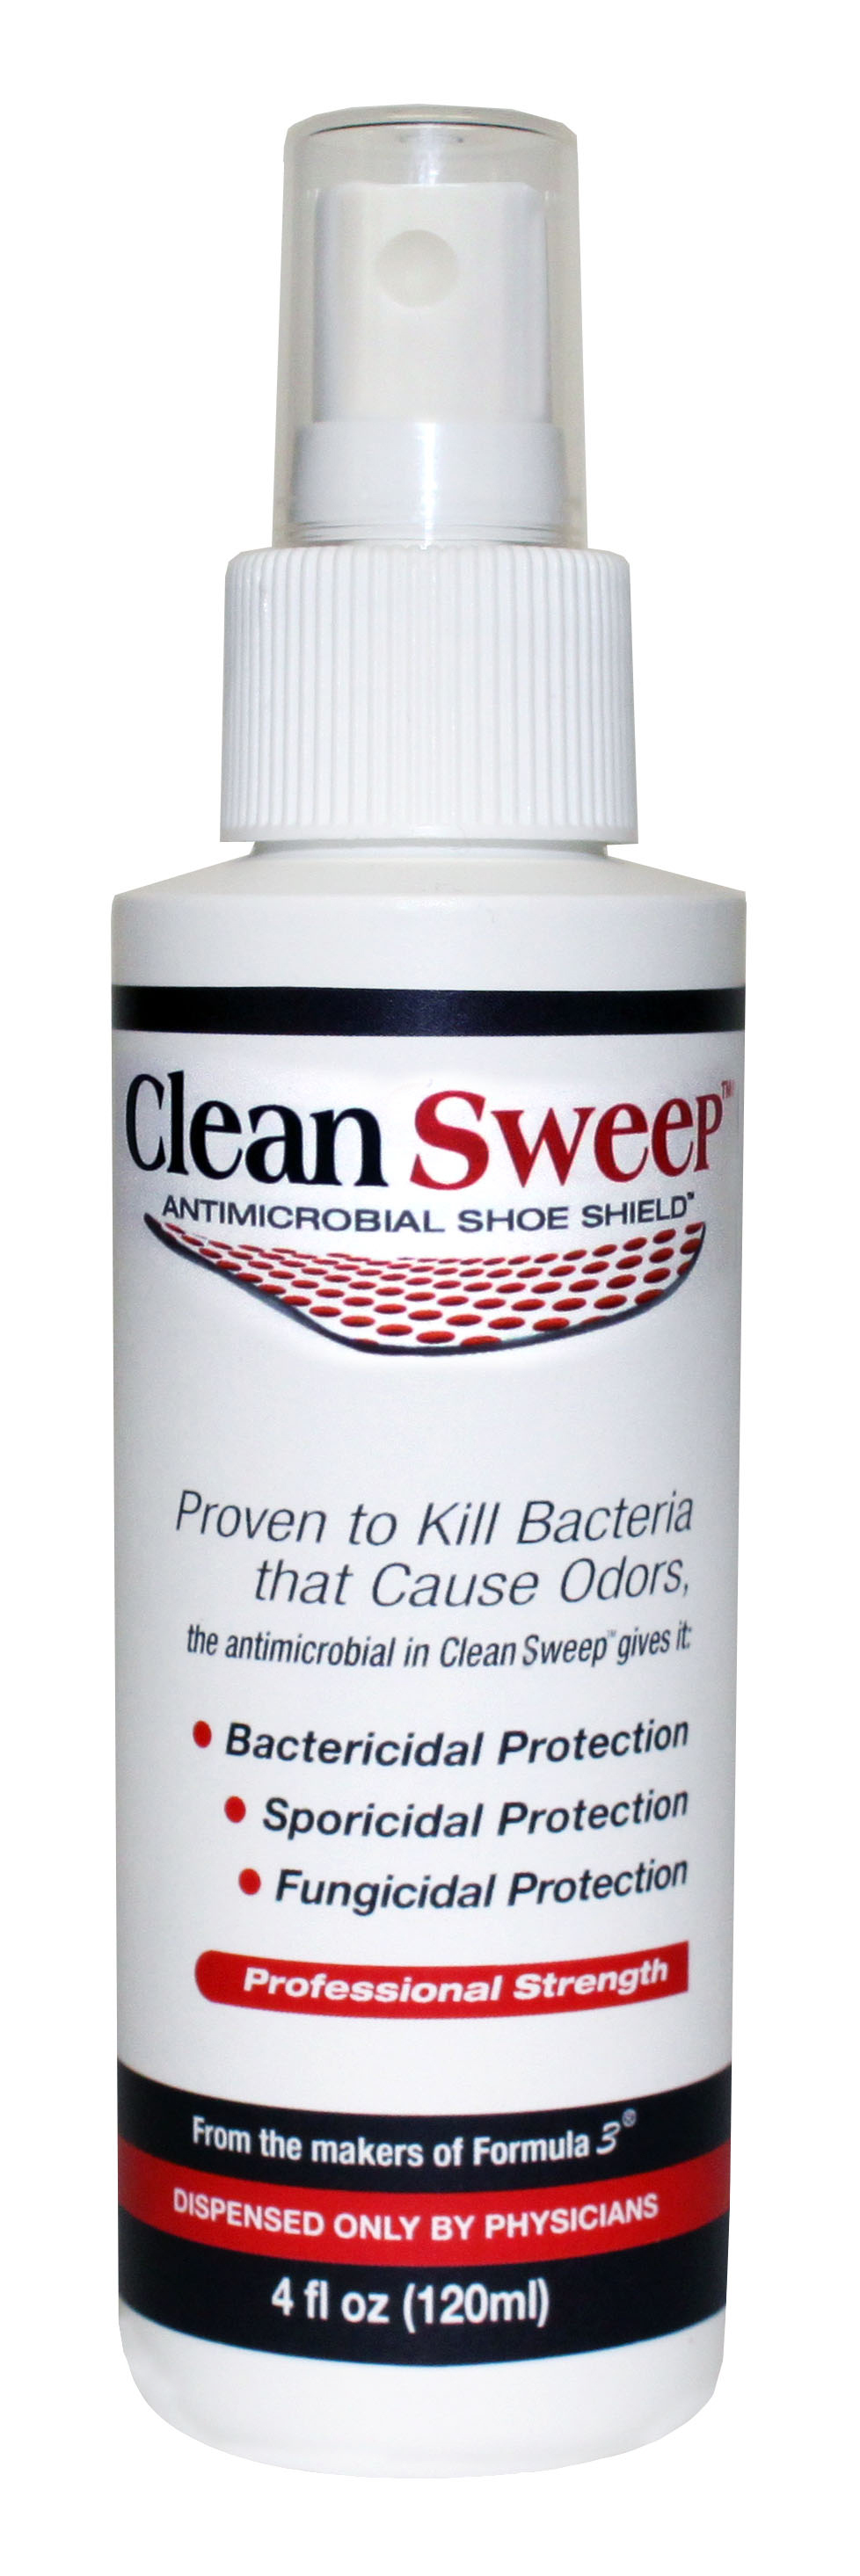 Clean Sweep™ Eliminates 99.9% of Shoe Odor Causing Bacteria and Fungus